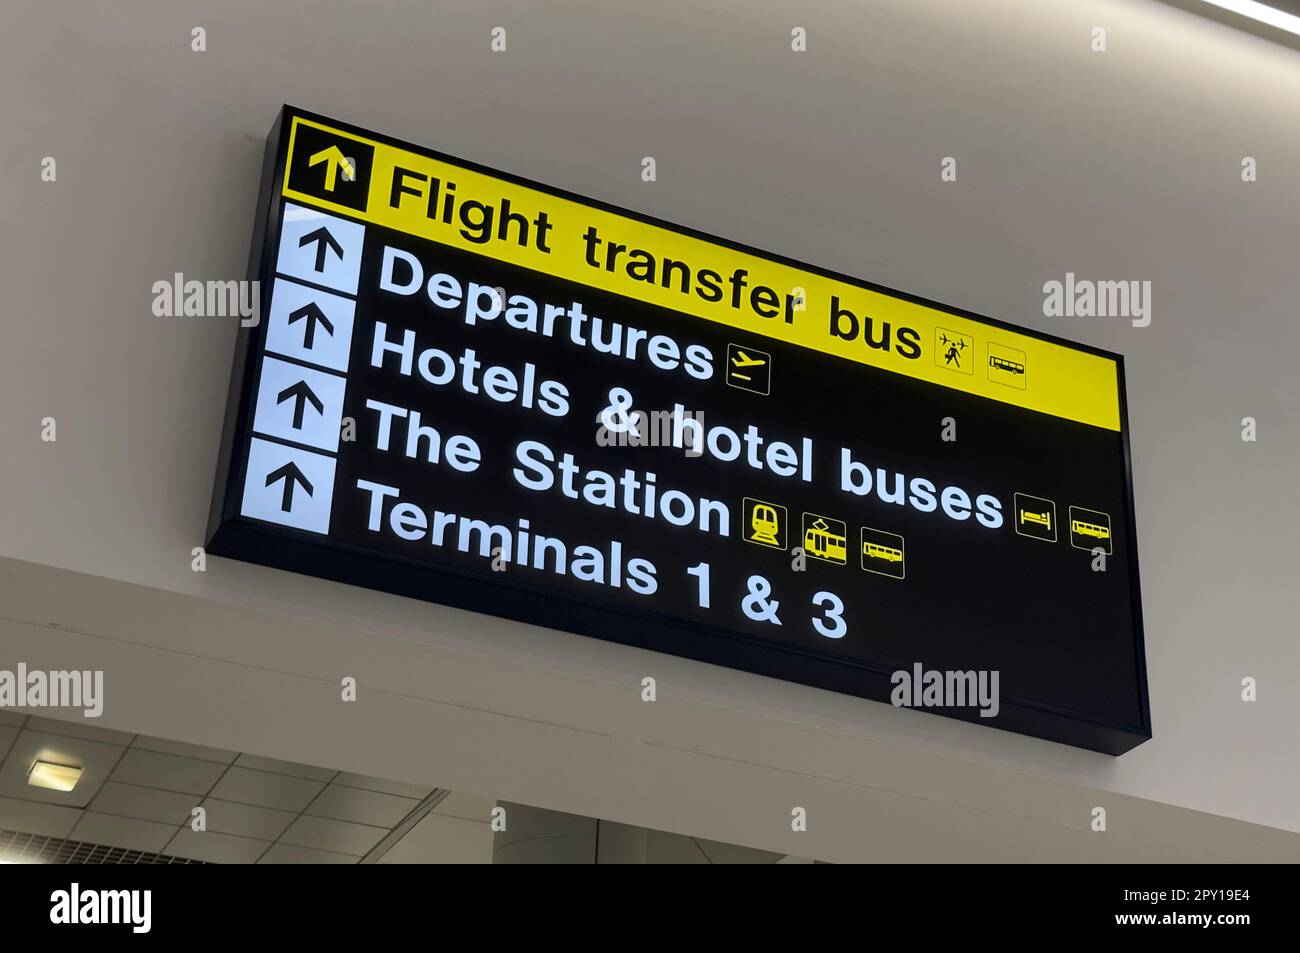 Sign in Manchester International Airport, Flight transfer bus, Departures, Hotels & buses, station & terminals 1 & 2 Stock Photo